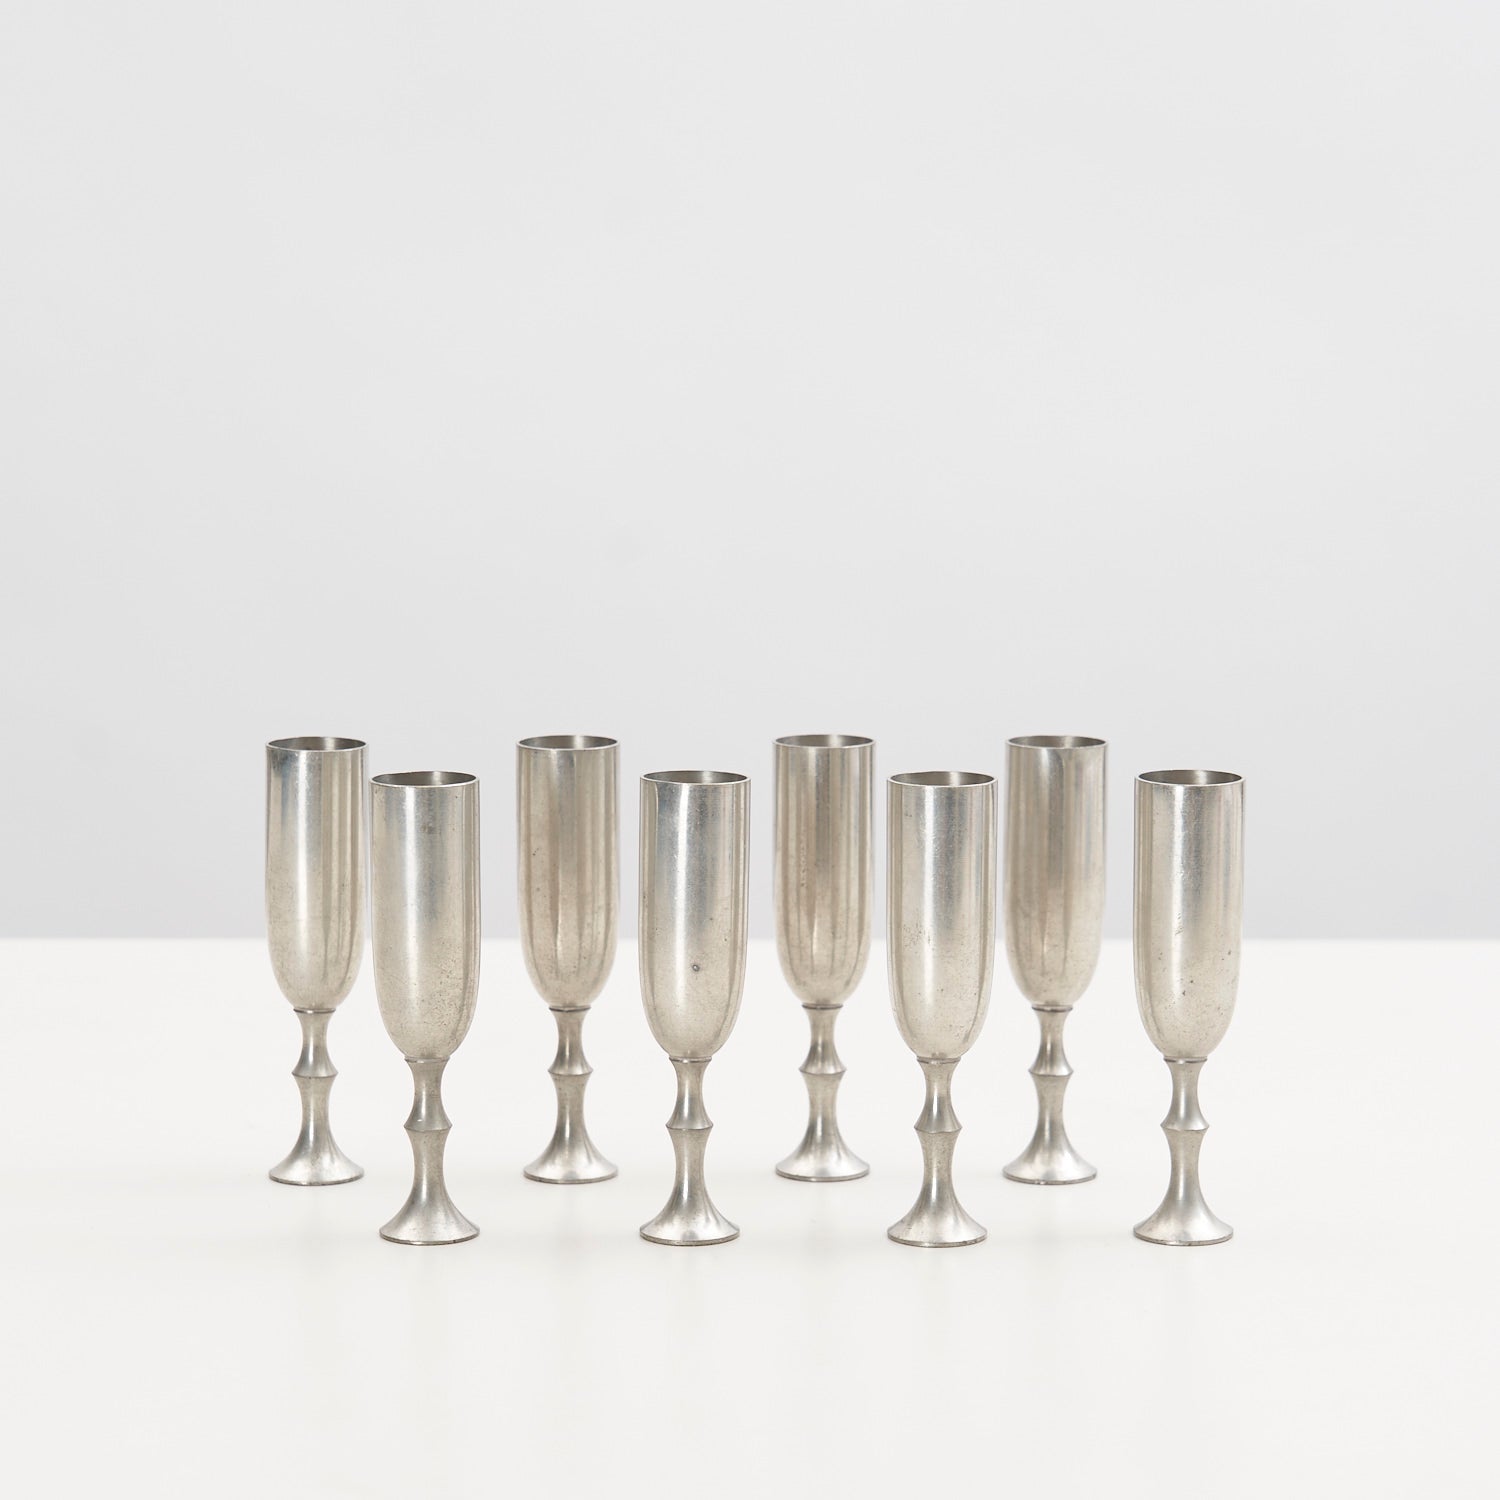 Set of 8 Pewter Small Goblets